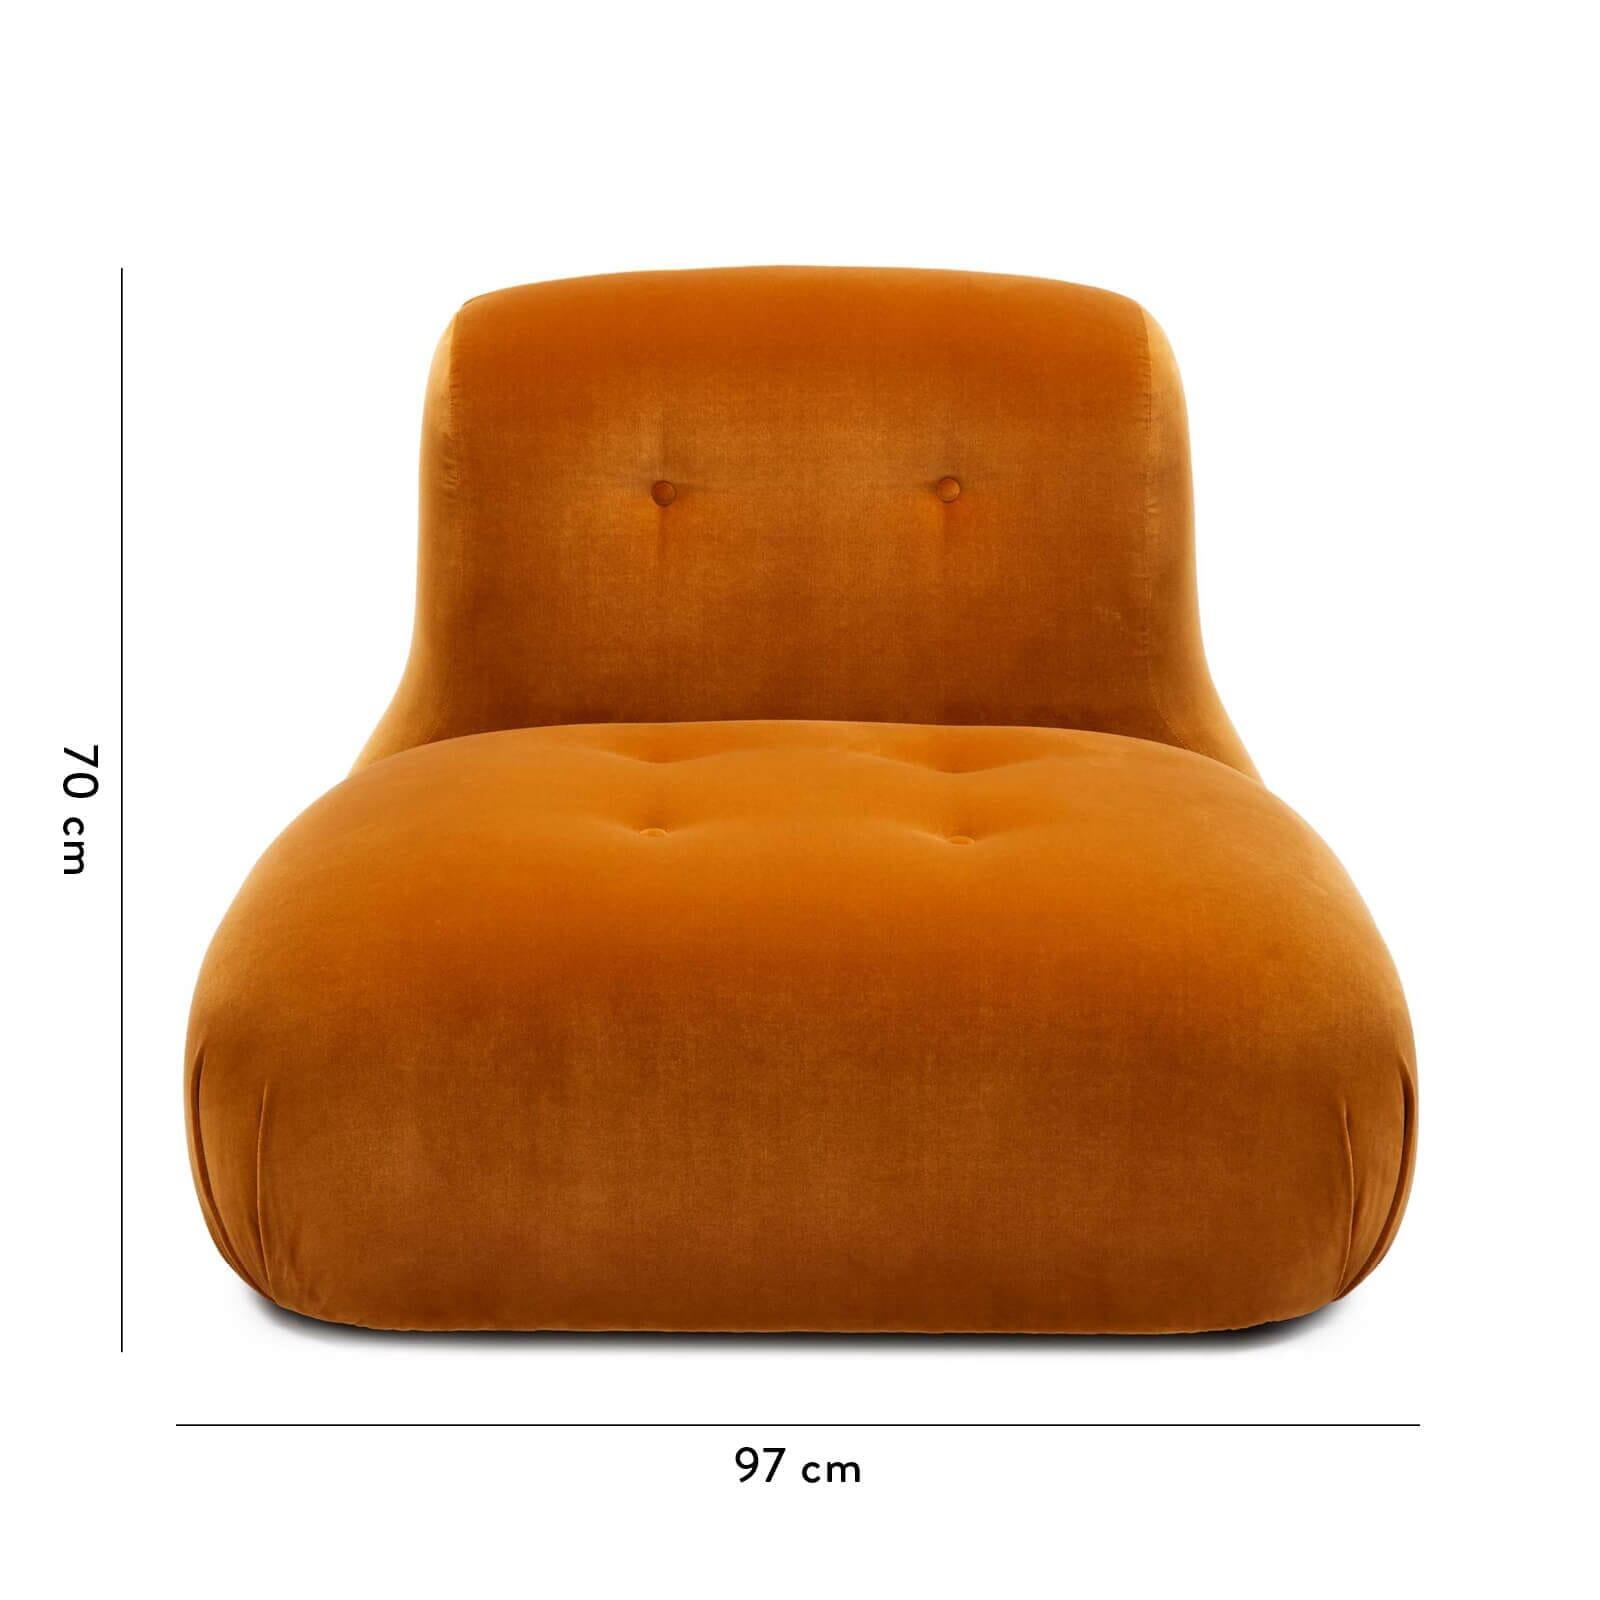 Our take on the modular sofas of the 1960's modernist movement, the Castle chair is the epitome of laid-back style quite literally, with its low-lying shape creating an instantly relaxed vibe for cinema rooms, reading rooms or living rooms. And yet